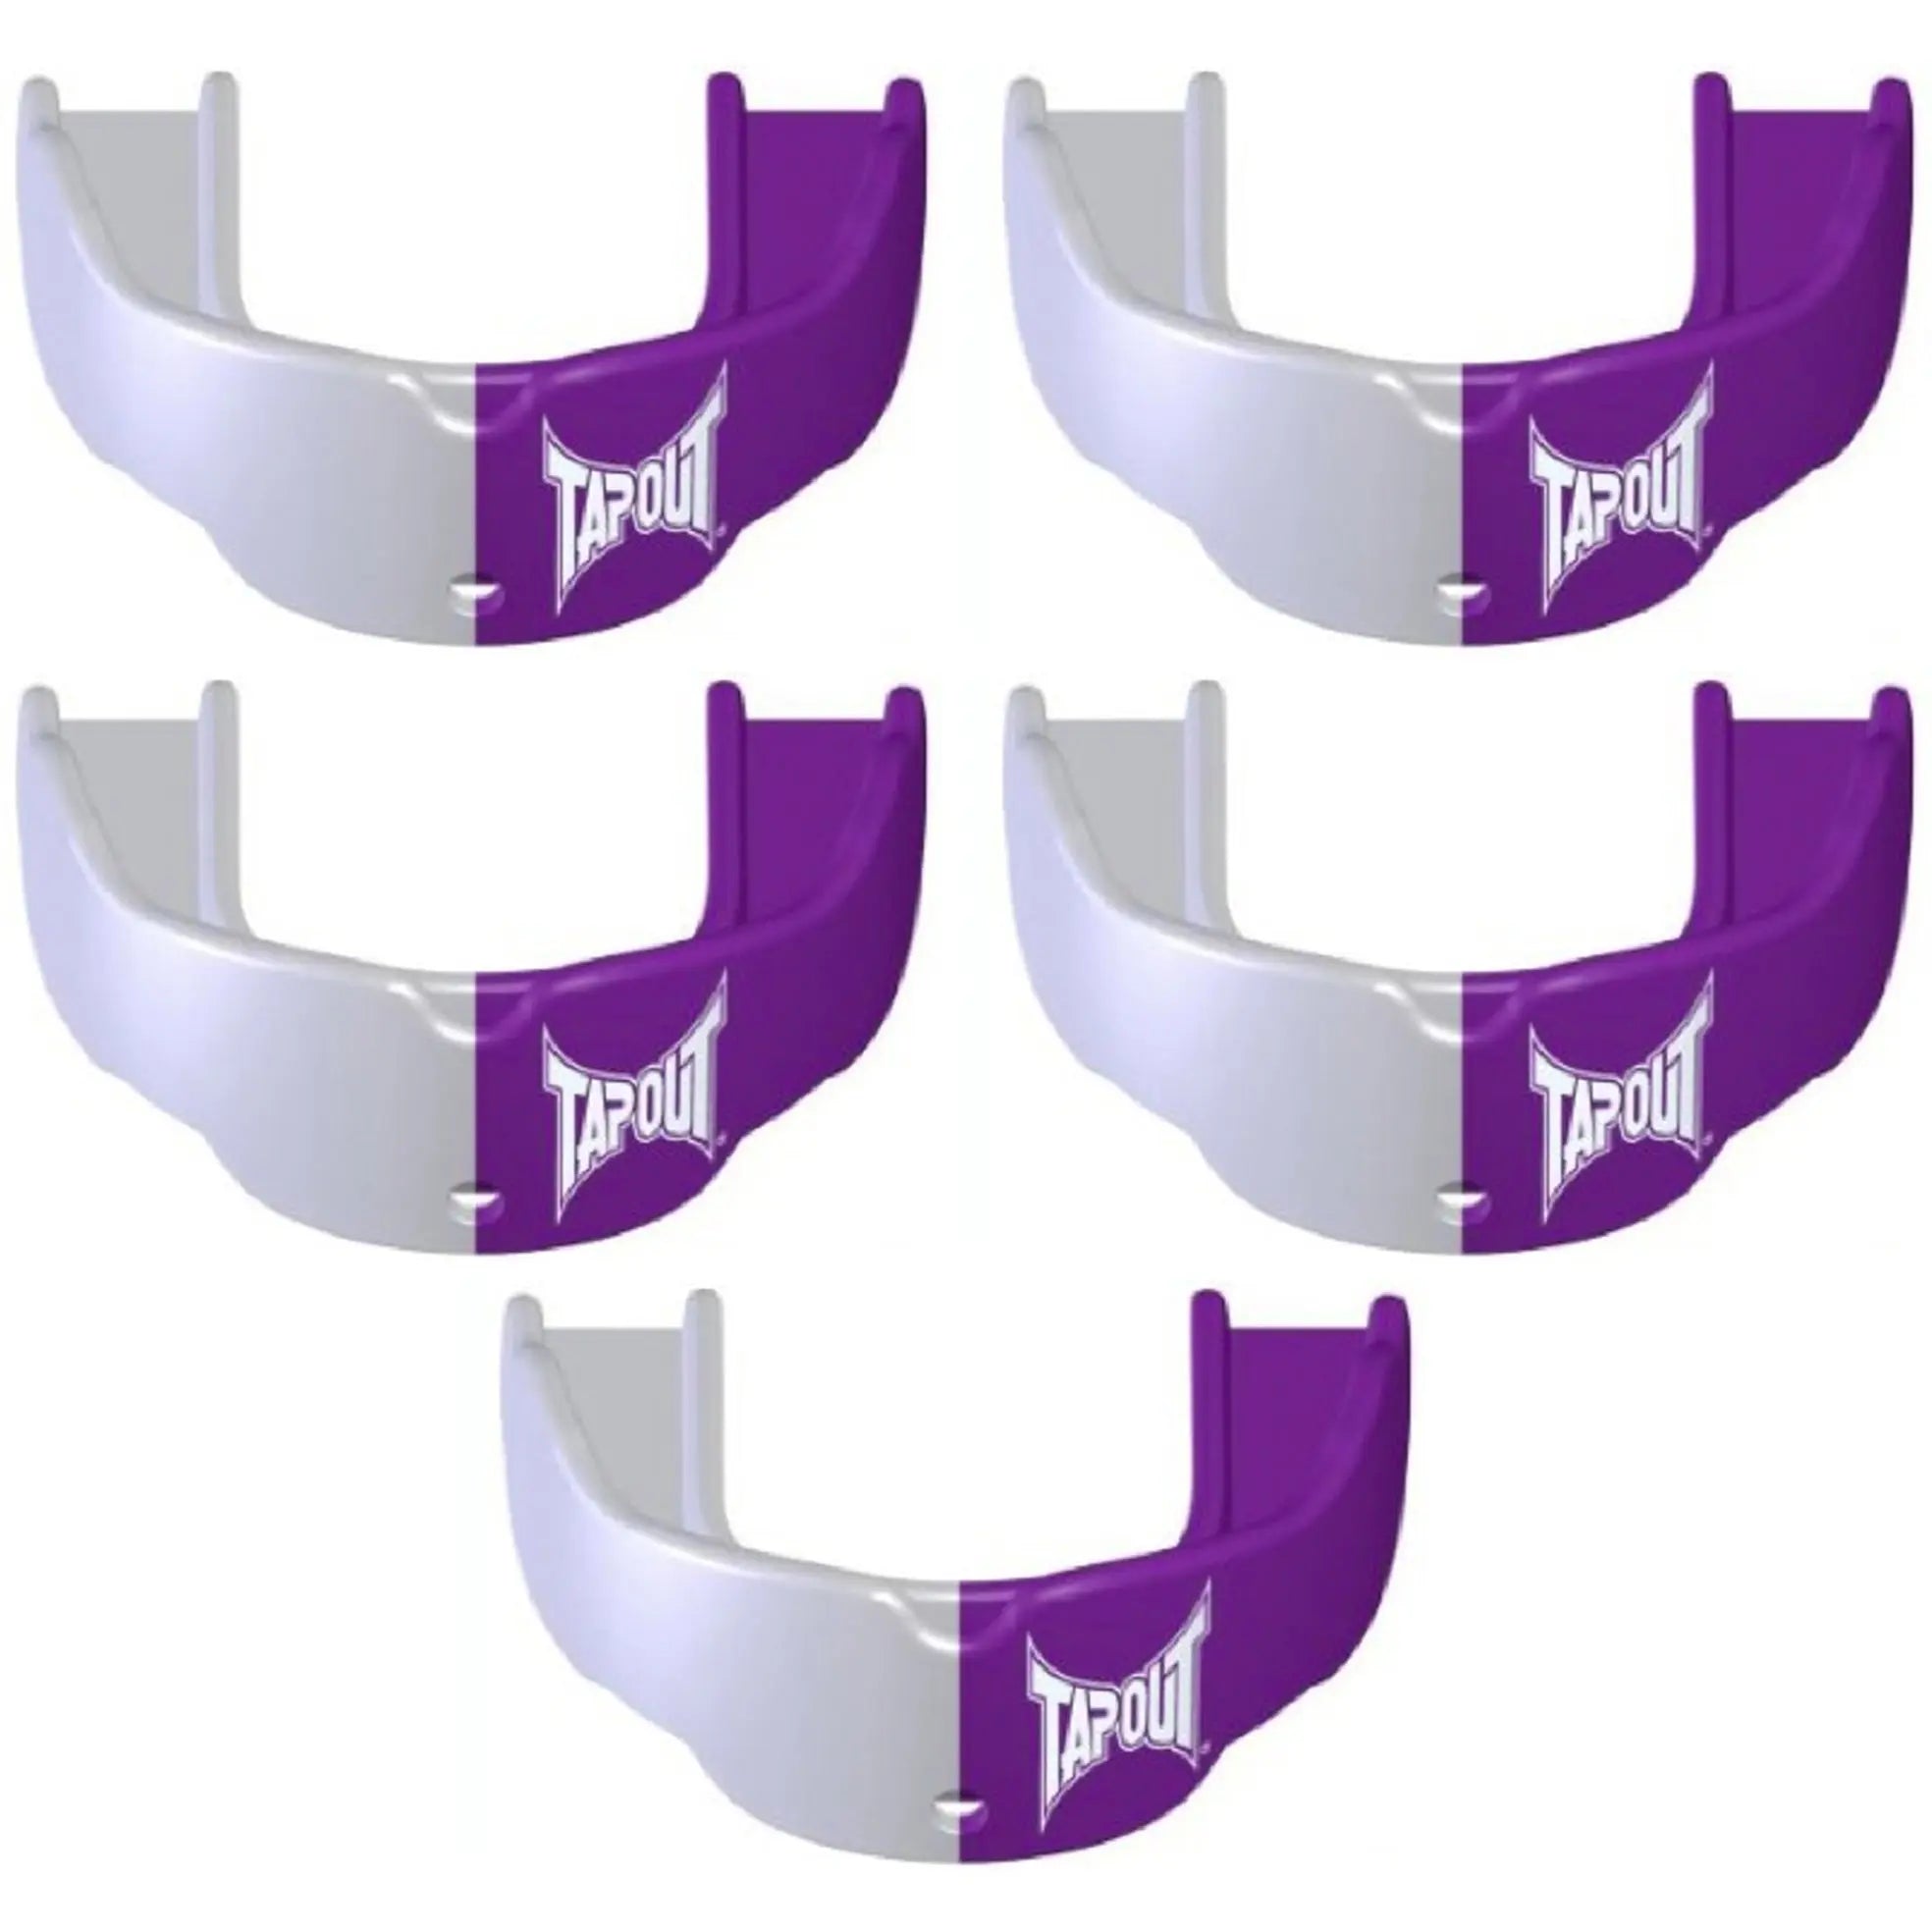 Tapout Adult Protective Sports Mouthguard with Strap 5-Pack - Purple/White Tapout